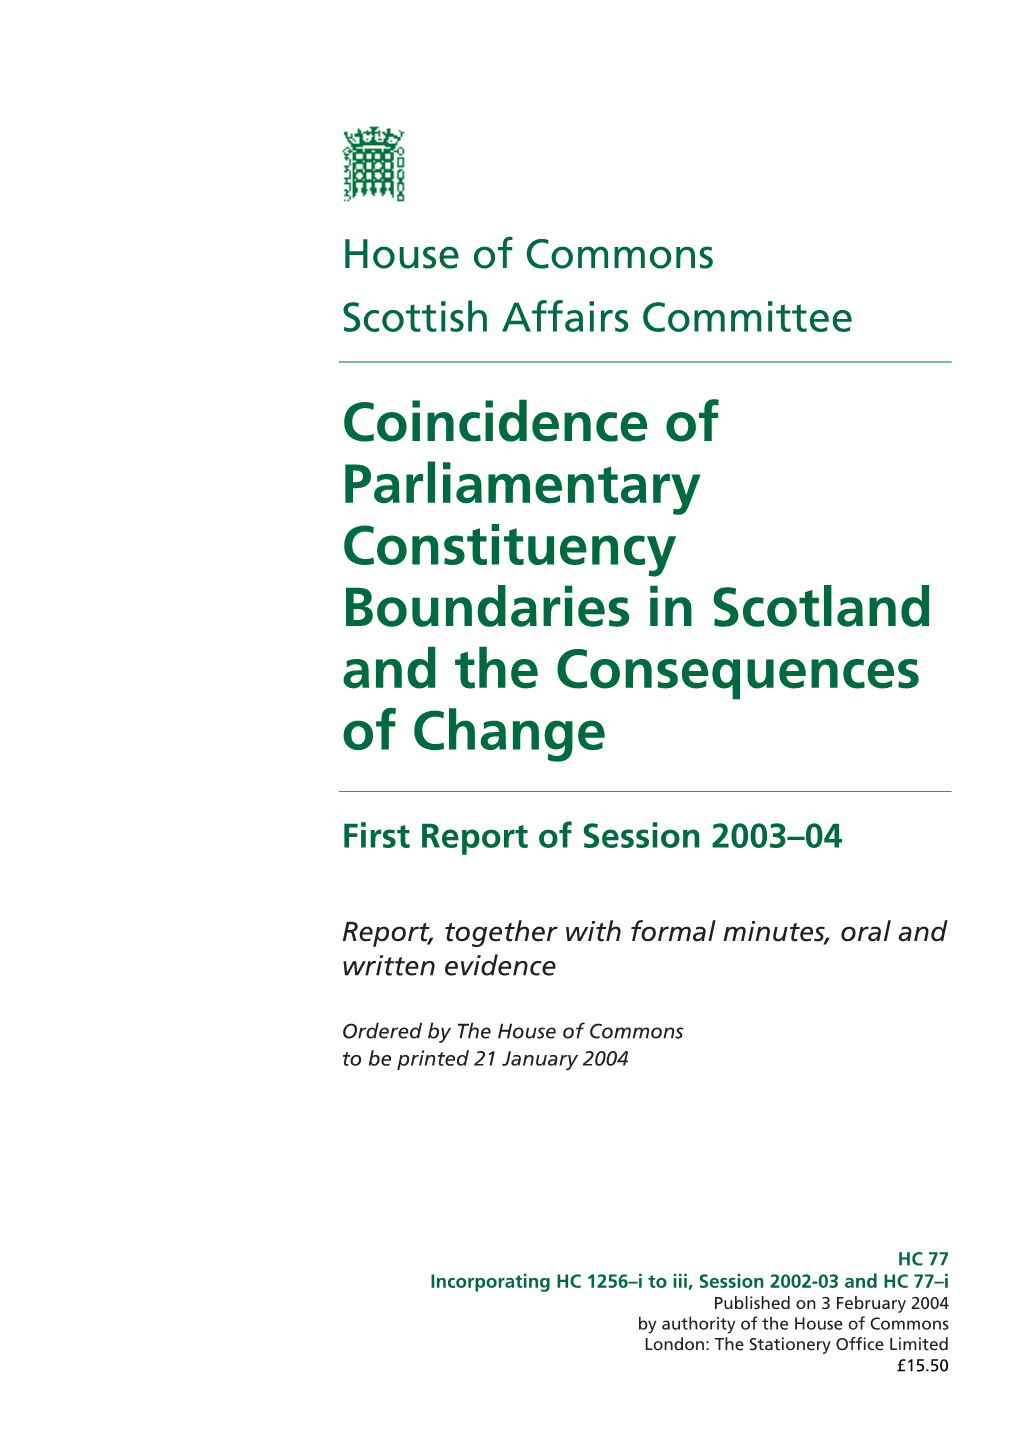 Coincidence of Parliamentary Constituency Boundaries in Scotland and the Consequences of Change